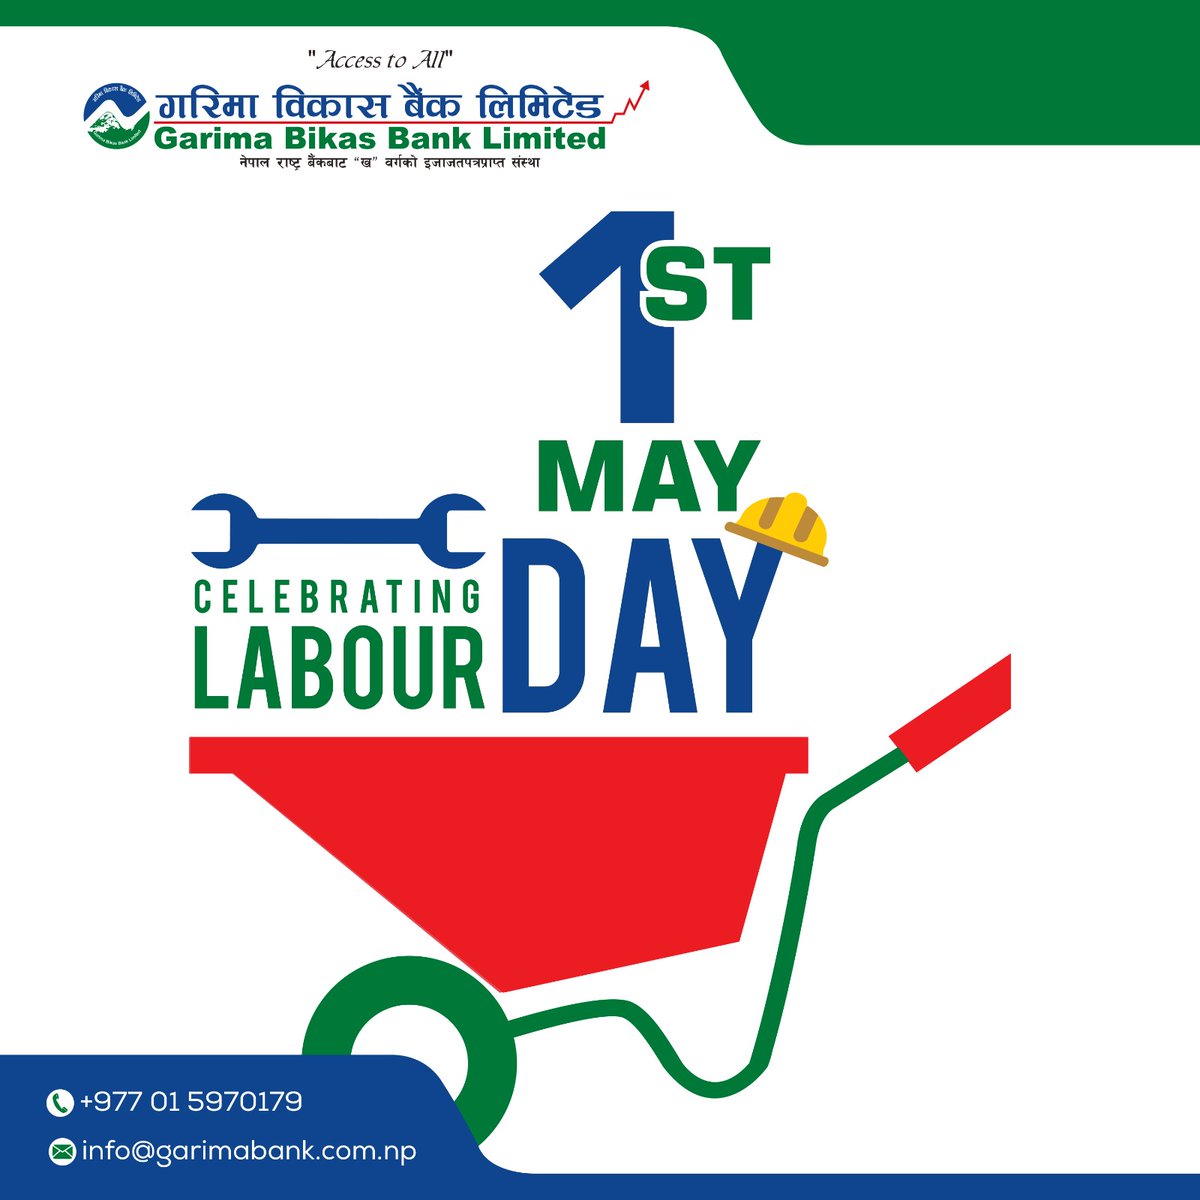 To all the workers out there, thank you for your endless efforts.Happy labour day !

#Garimabikasbank
#AccessToAll 
#safedigitalbanking 
#savingfuture
#labourday